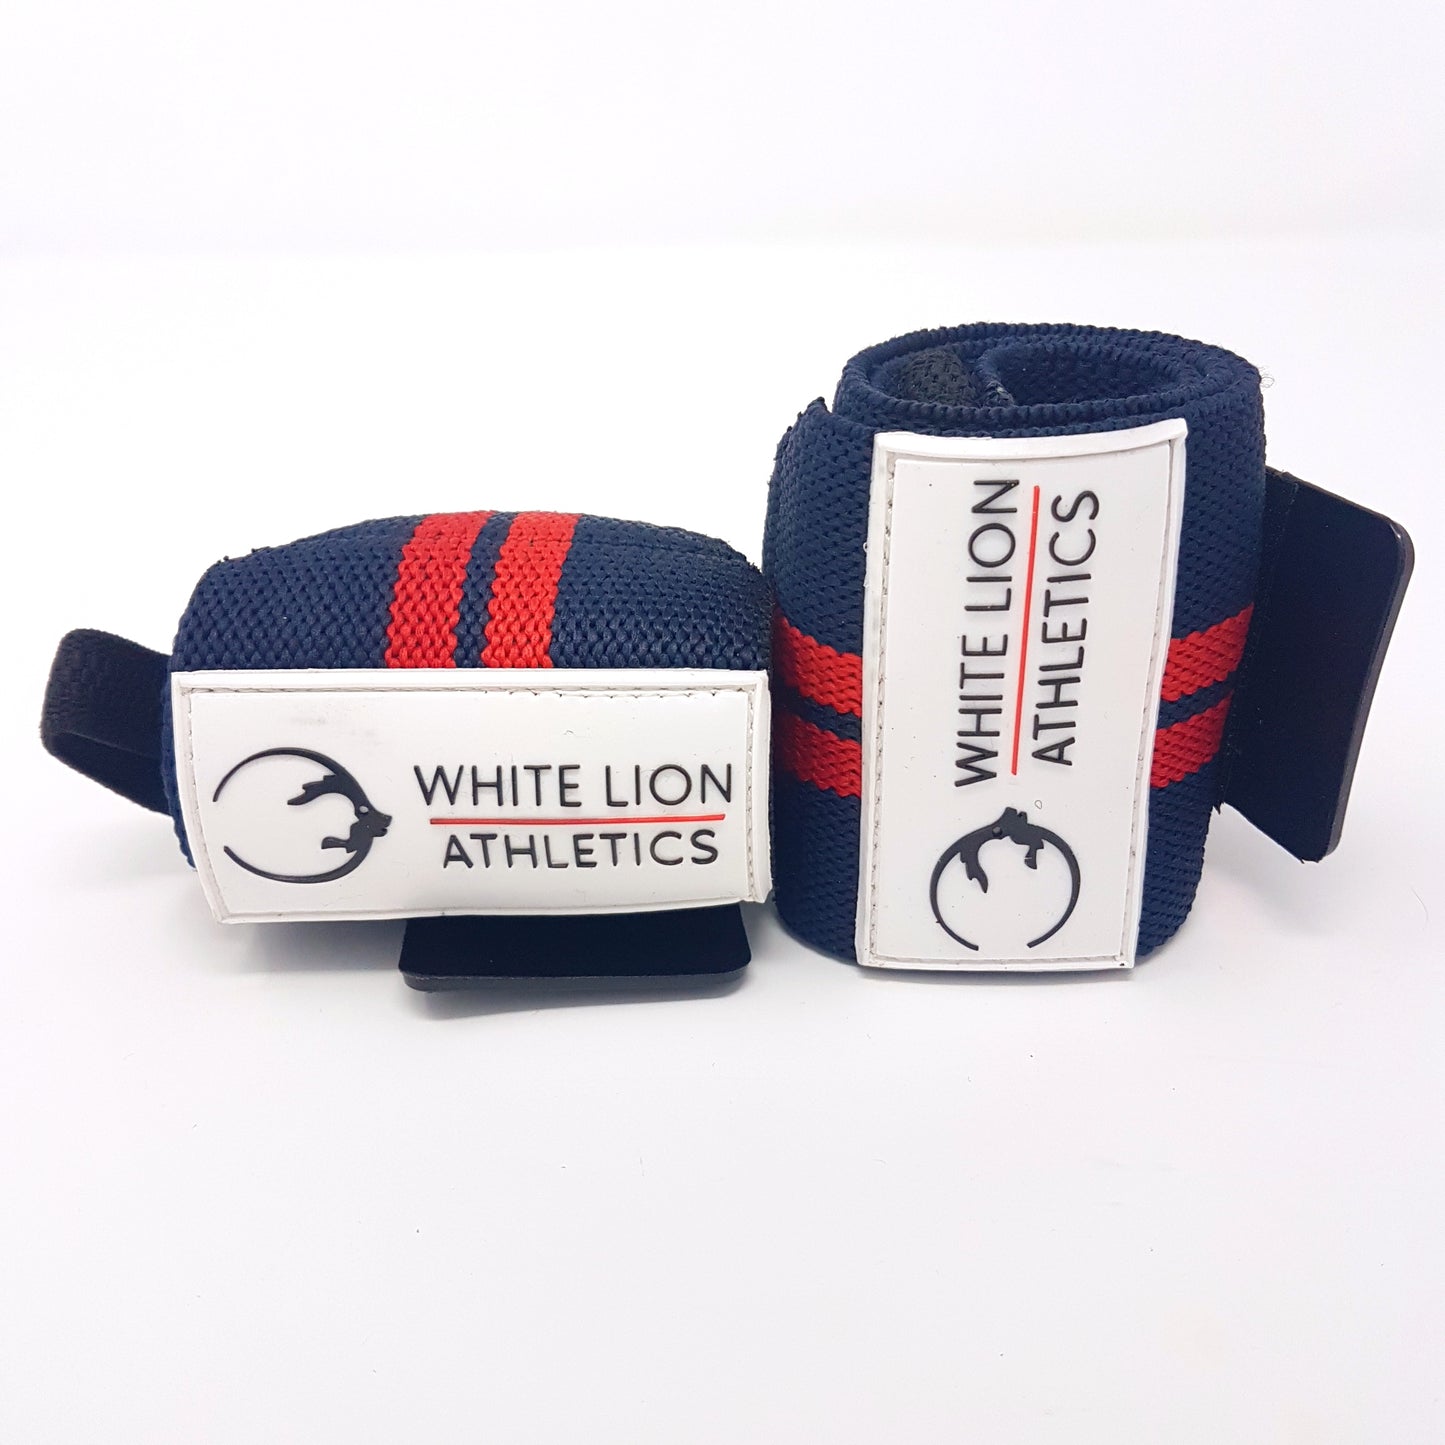 Wrist Wraps| Navy Blue with Red Stripes| Wrist Support for Weightlifting & Crossfit - White Lion Athletics